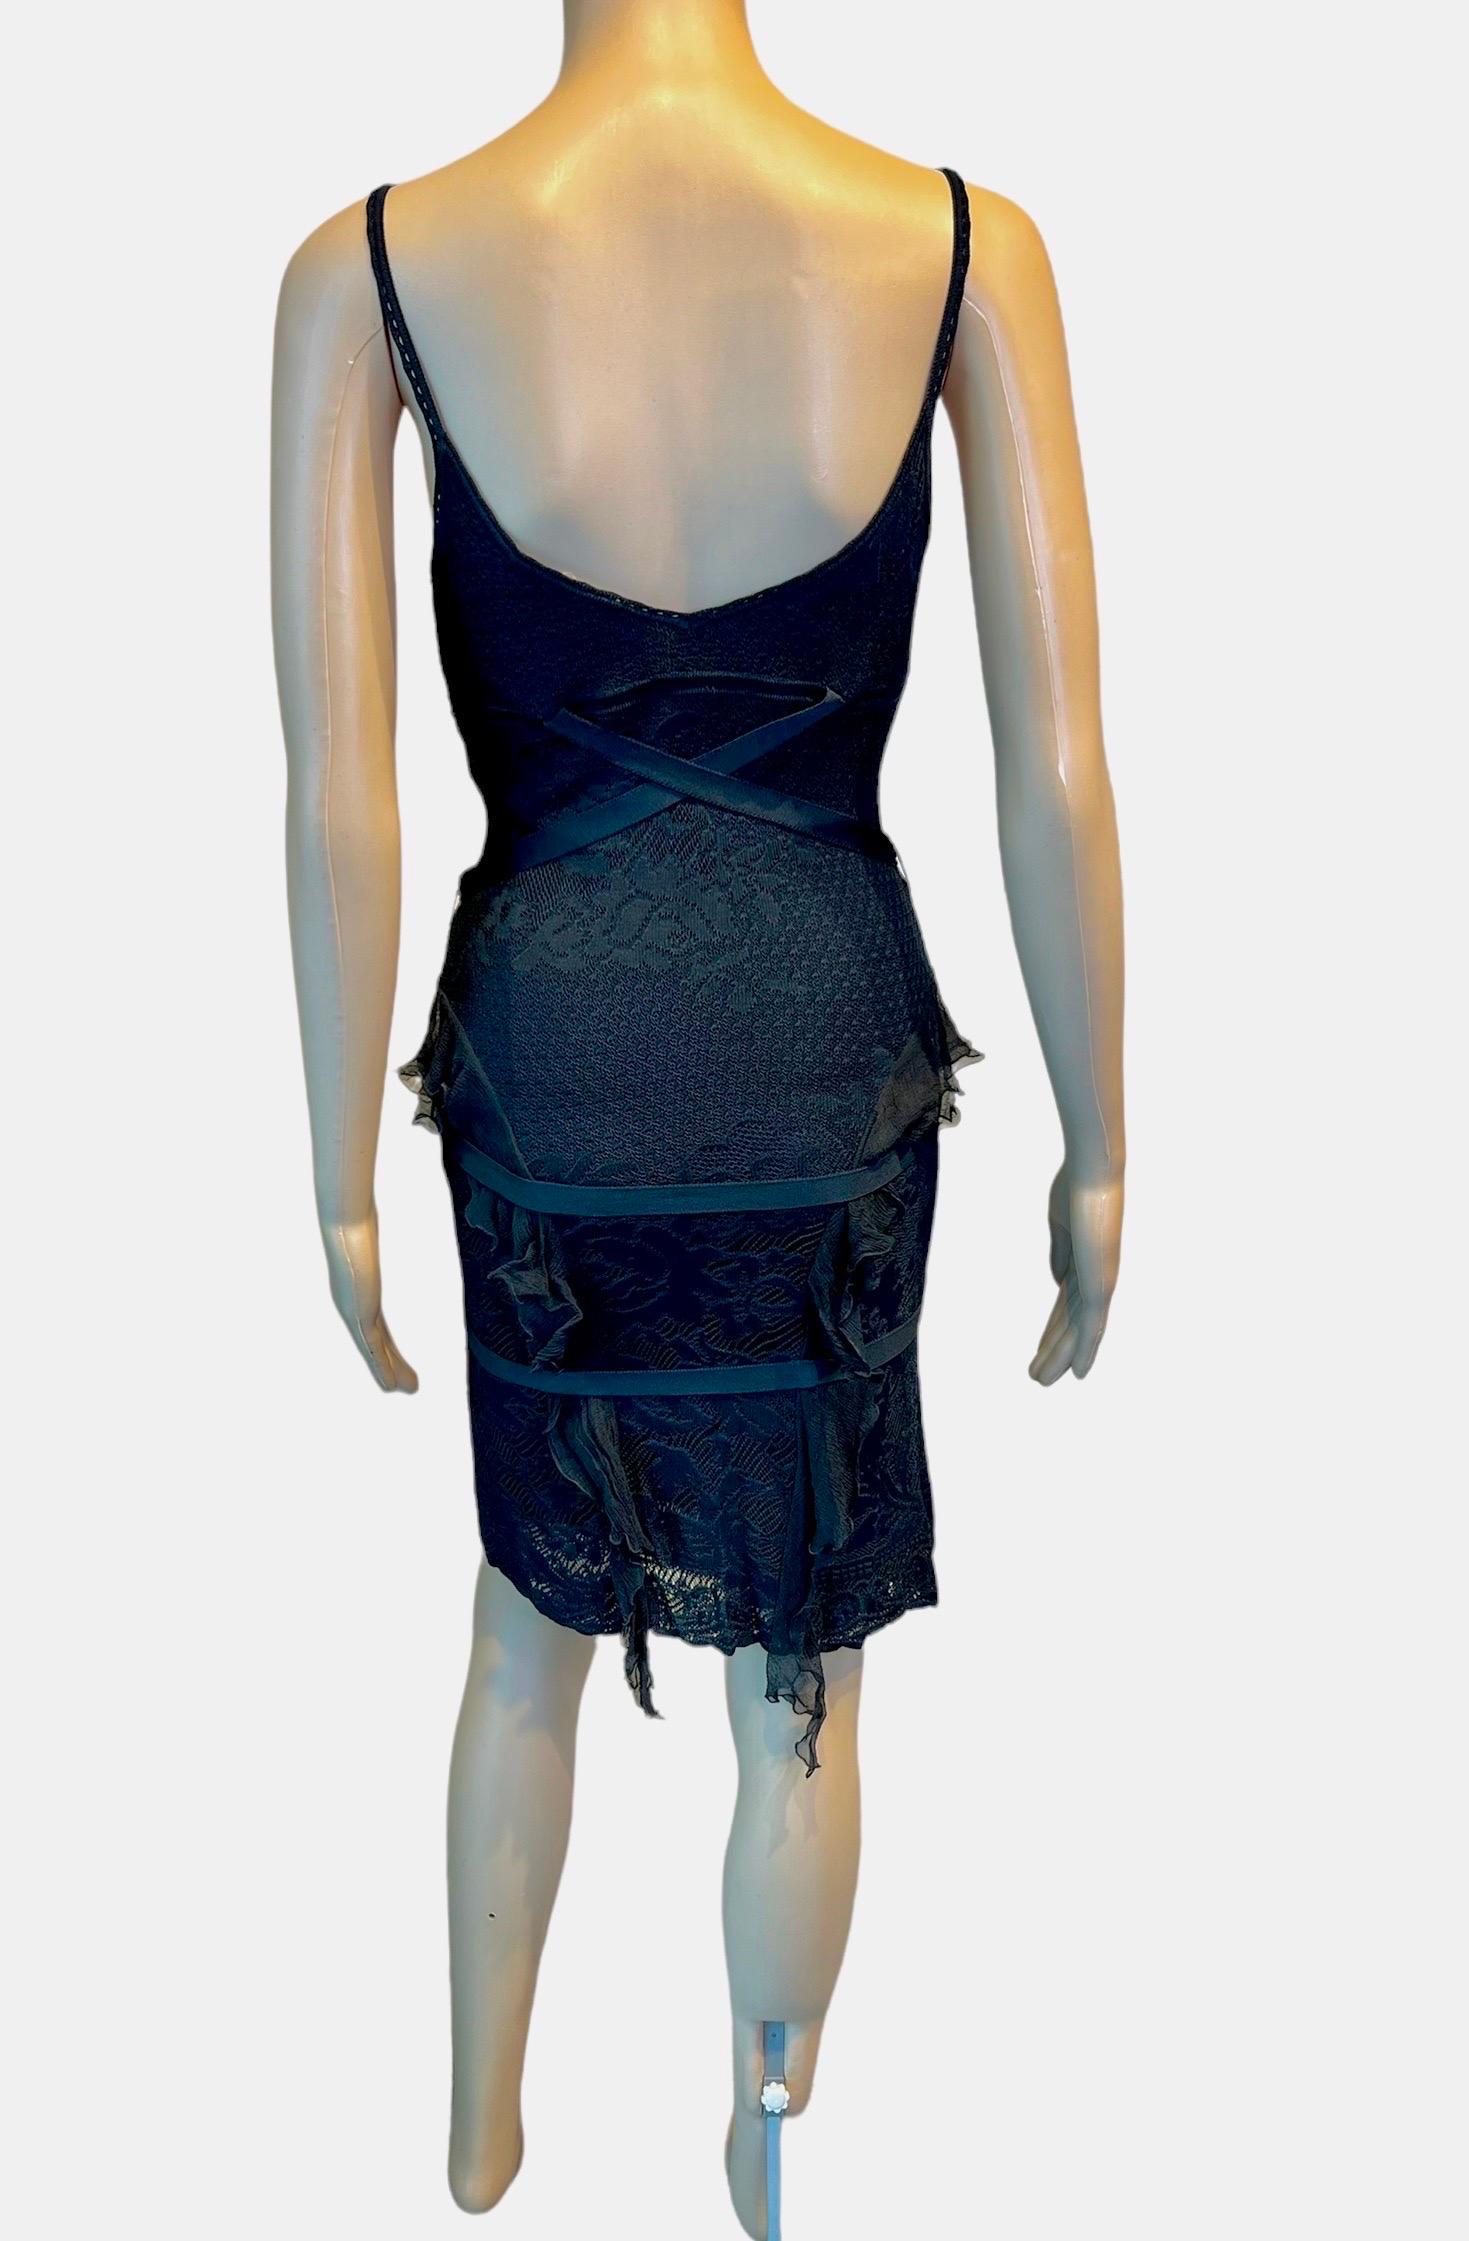 Women's Christian Dior by John Galliano S/S 2003 Sheer Lace Bondage Knit Black Dress  For Sale